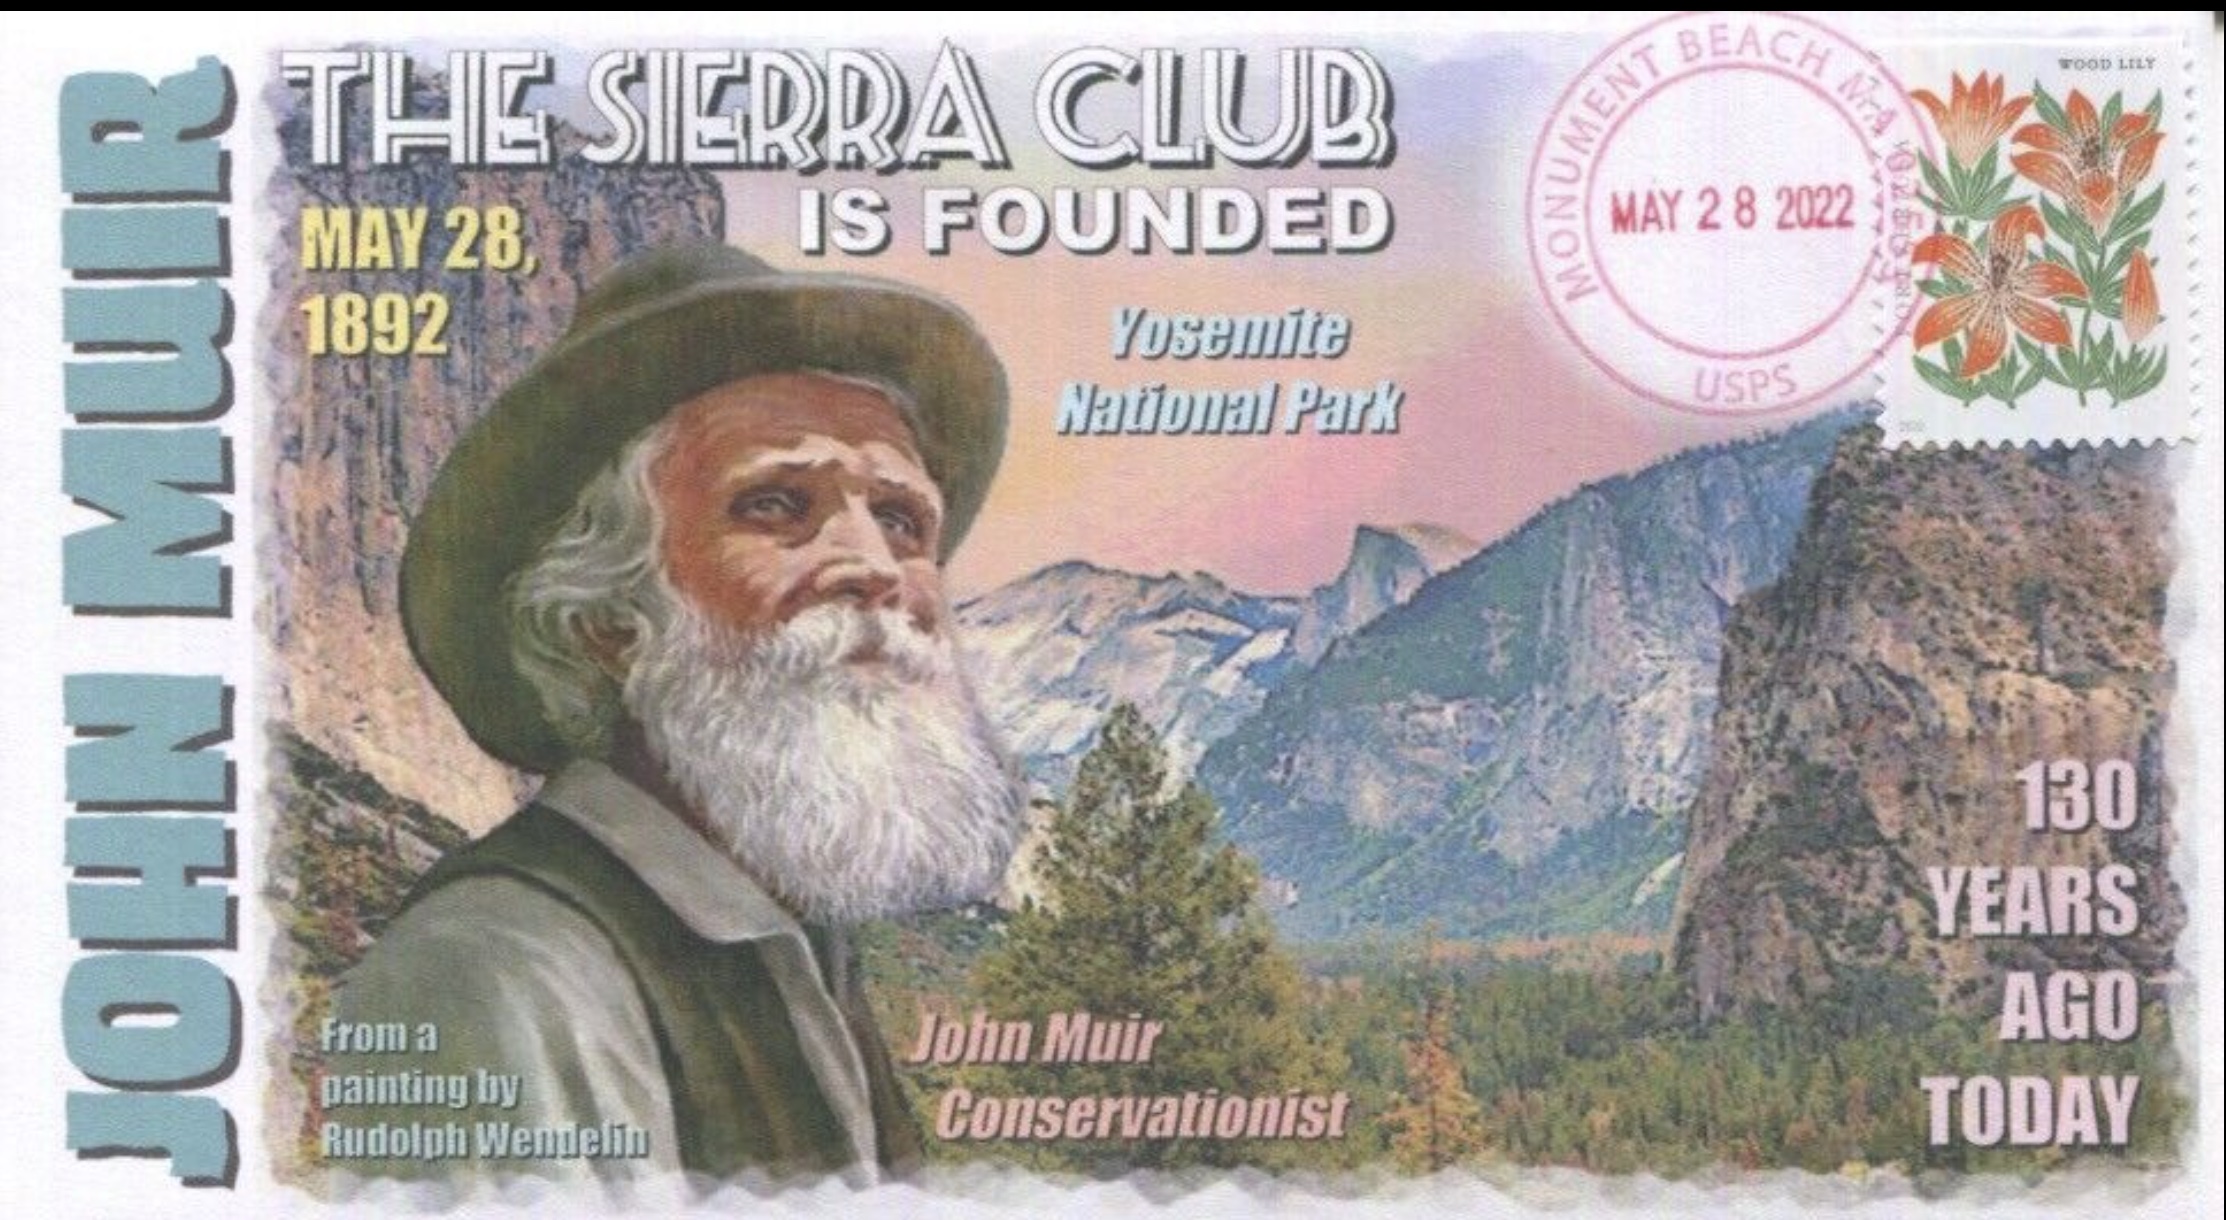 2022 John Muir and Yosemite Cachet by Coverscape in recognition of Founding of the Sierra Club on may 28, 1892